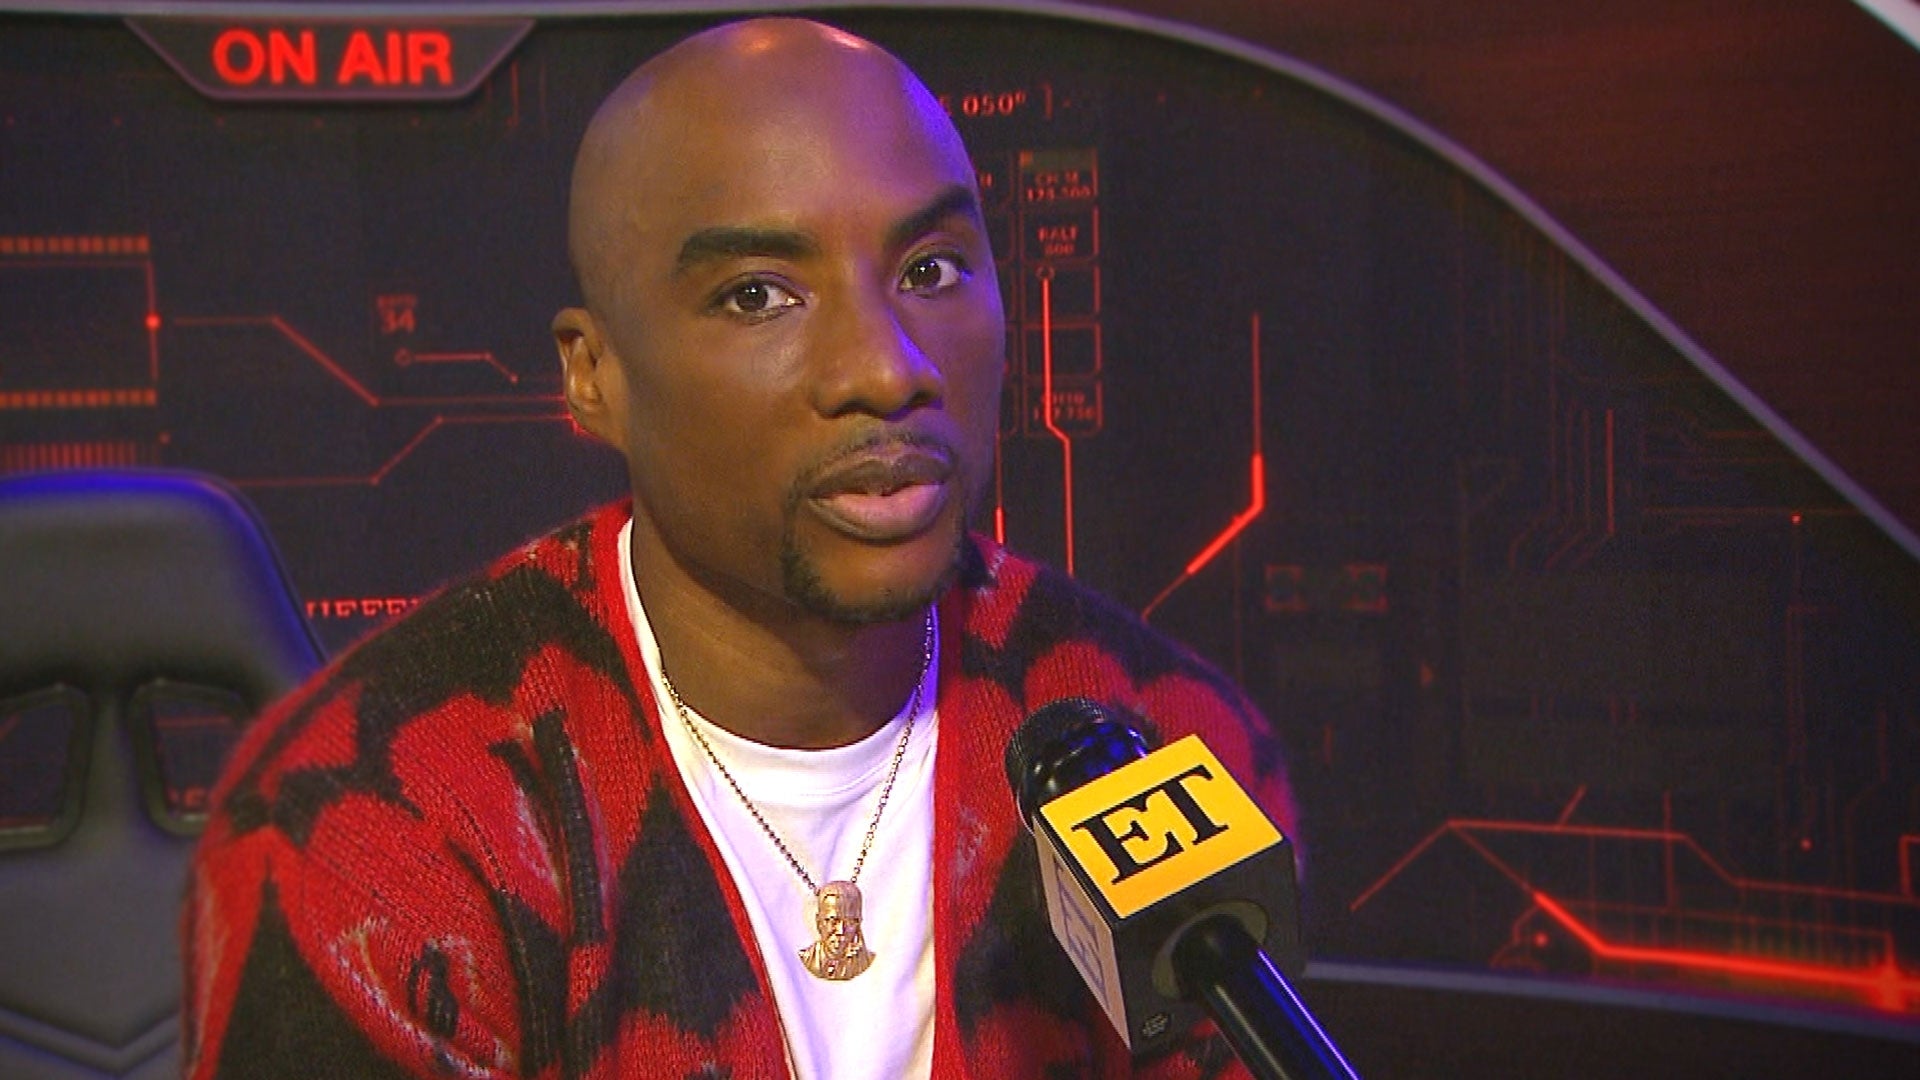 Charlamagne tha God on New Late-Night Show and When He'll Walk Away From  'The Breakfast Club' (Exclusive)